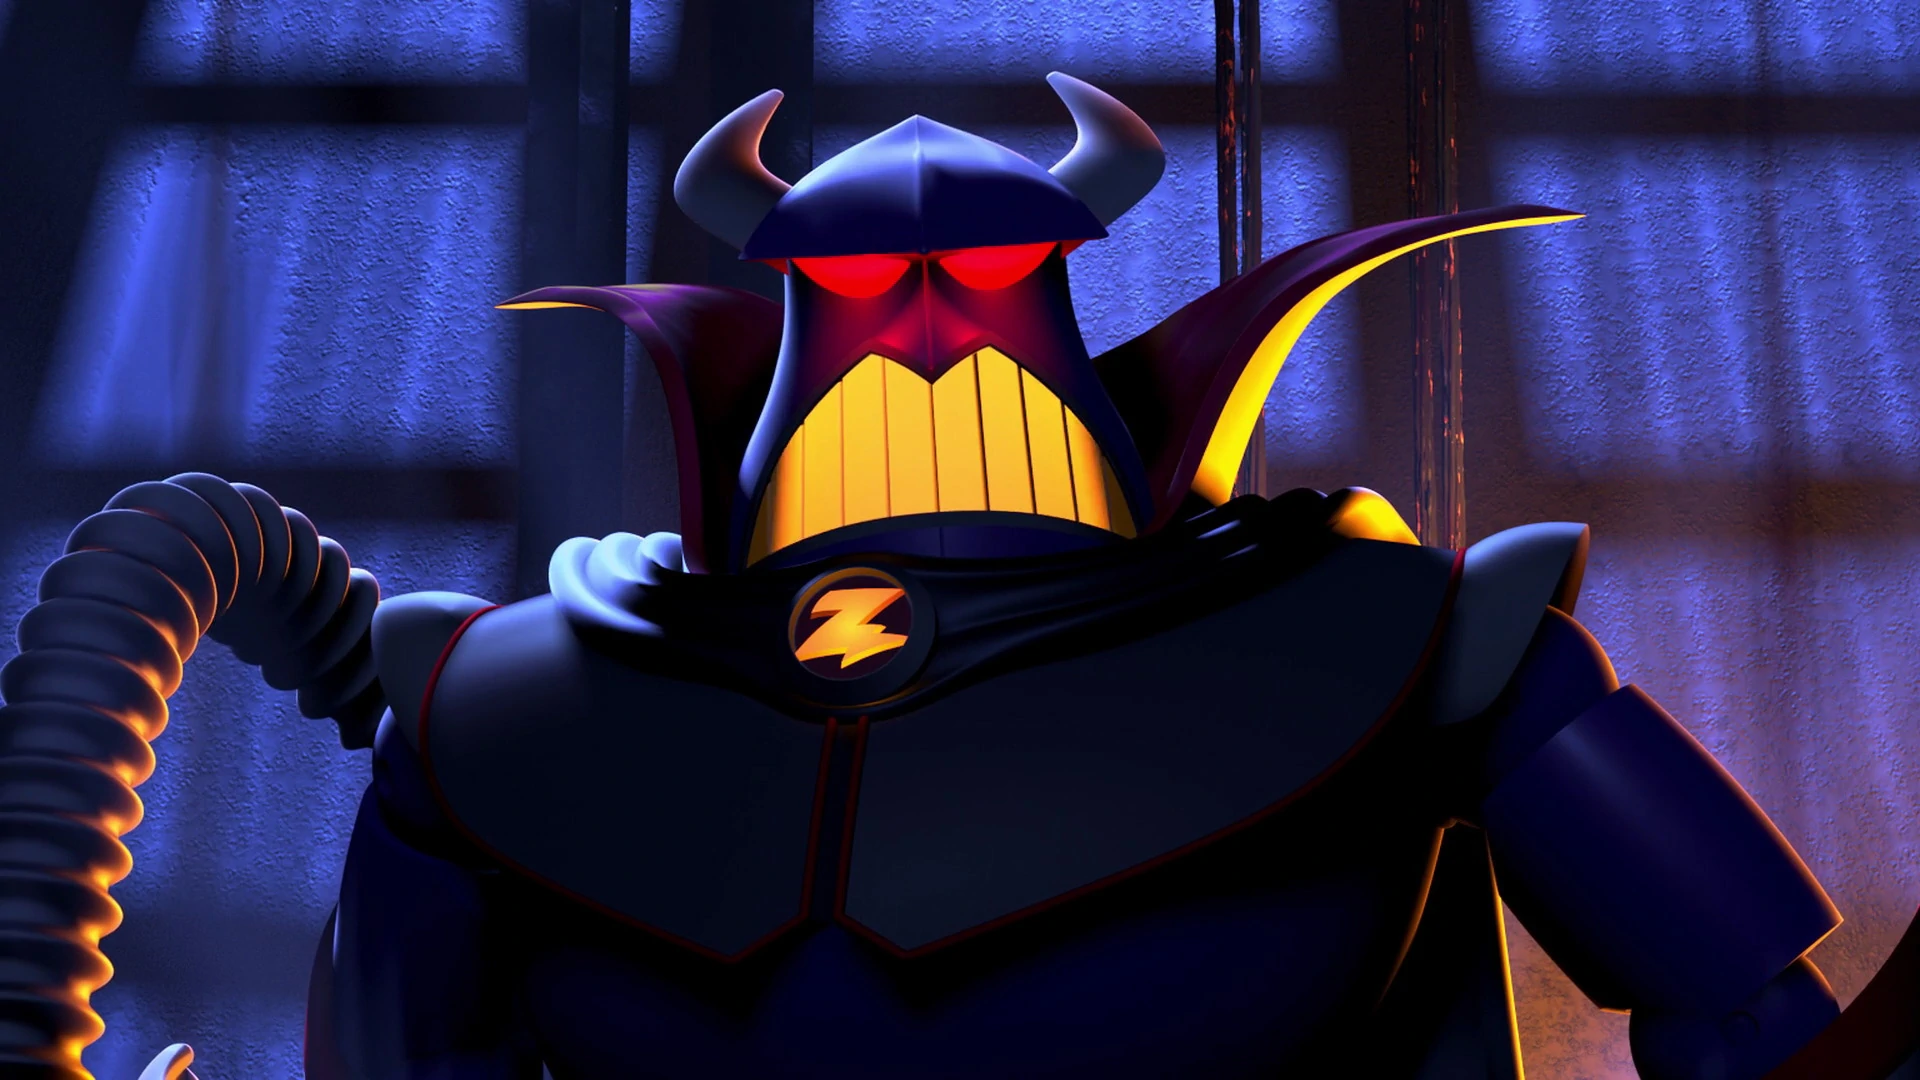 Best toy story characters: Emperor Zurg